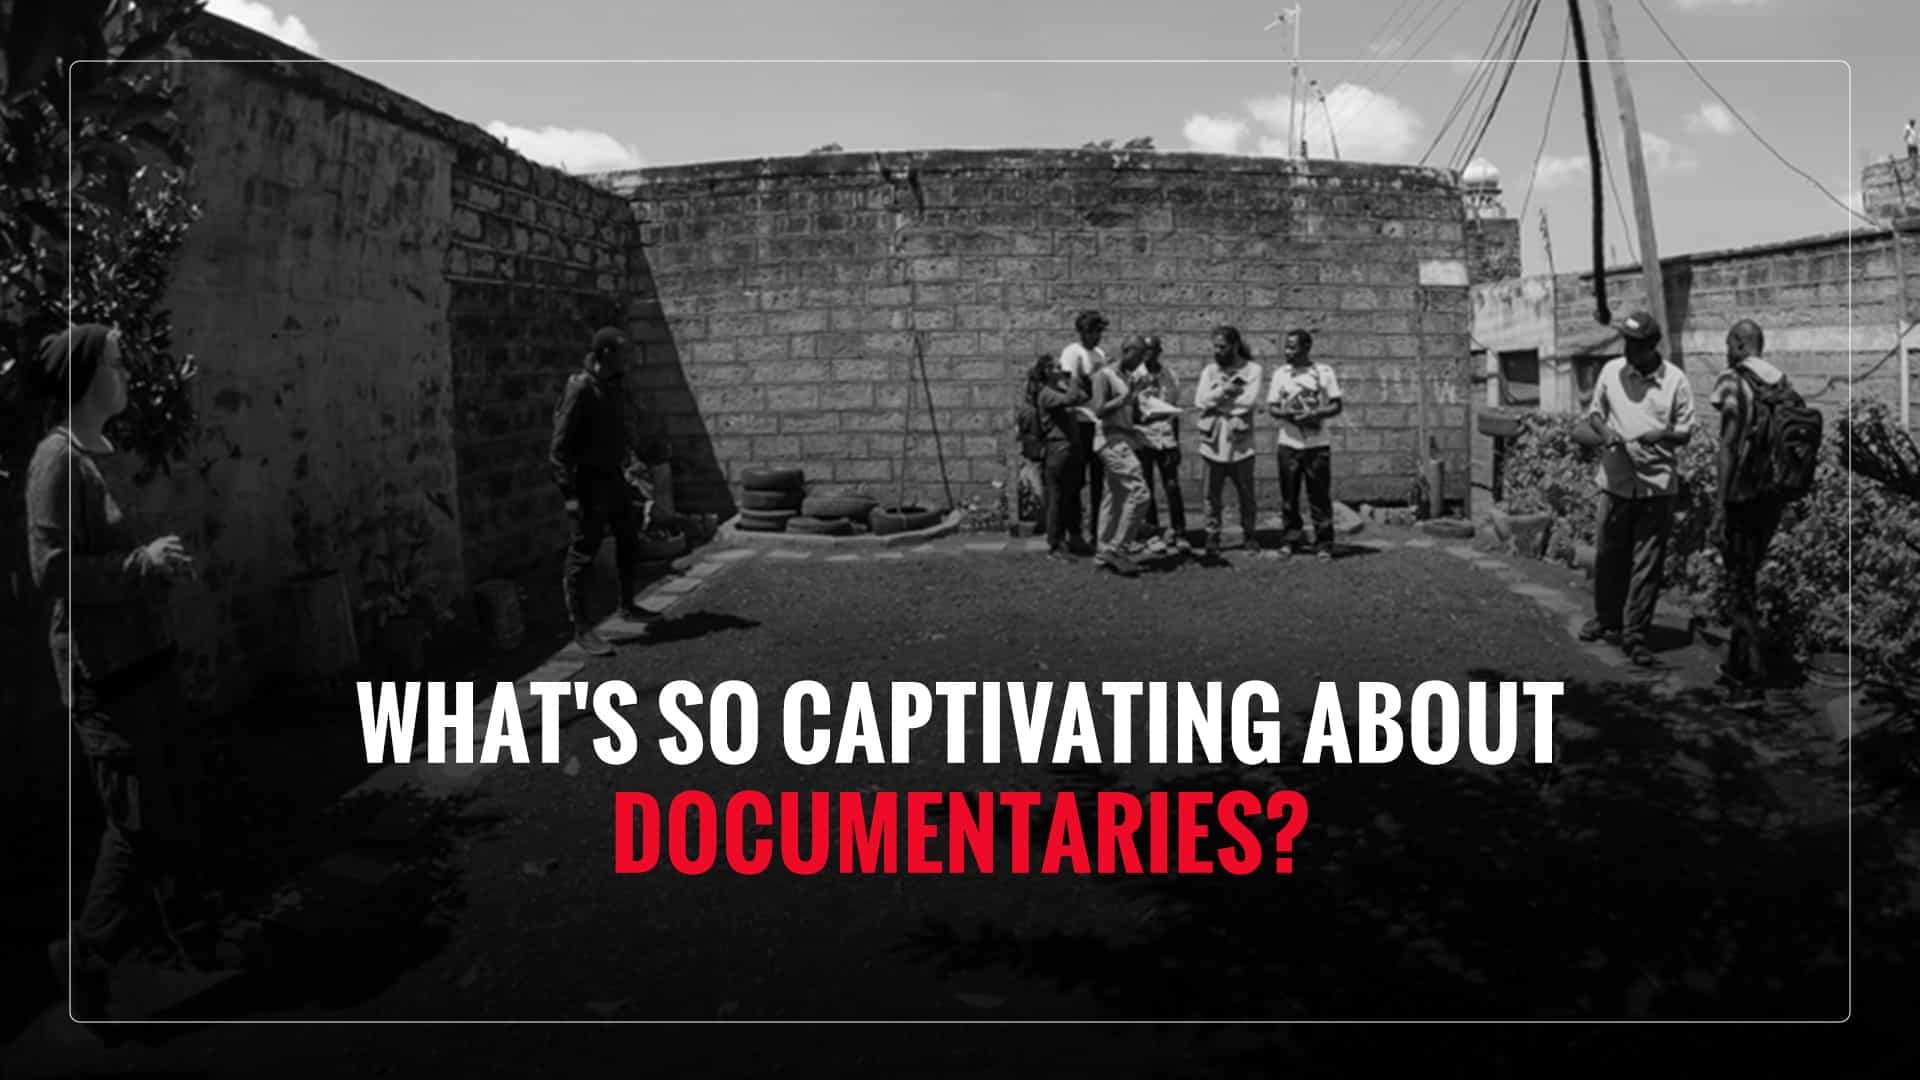 Here’s a deep dive into the world of documentary films